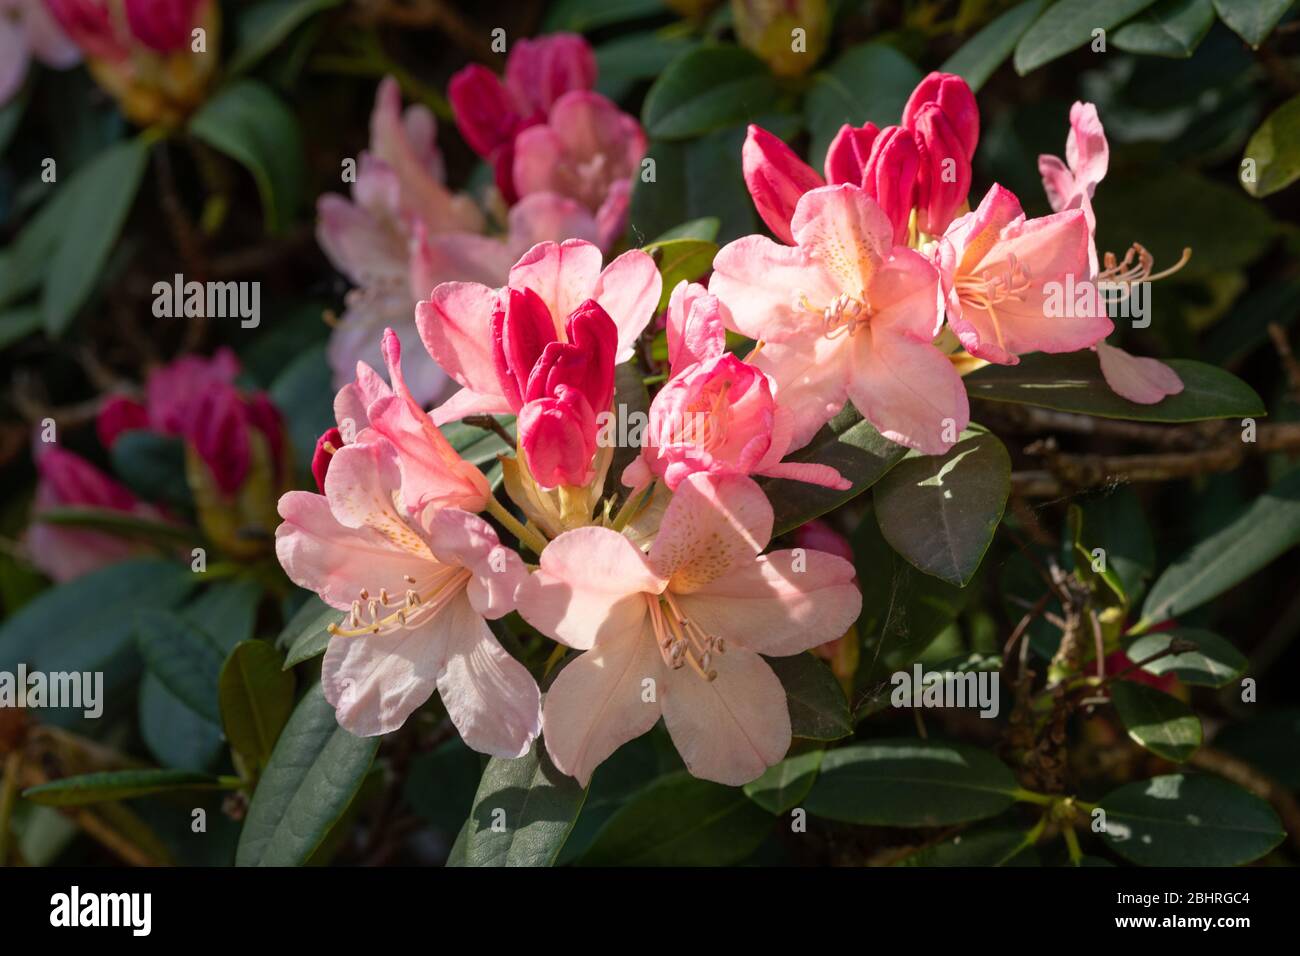 Rhododendron 'Percy Wiseman' plant with peachy pink colour flowers or blooms in late April, UK Stock Photo